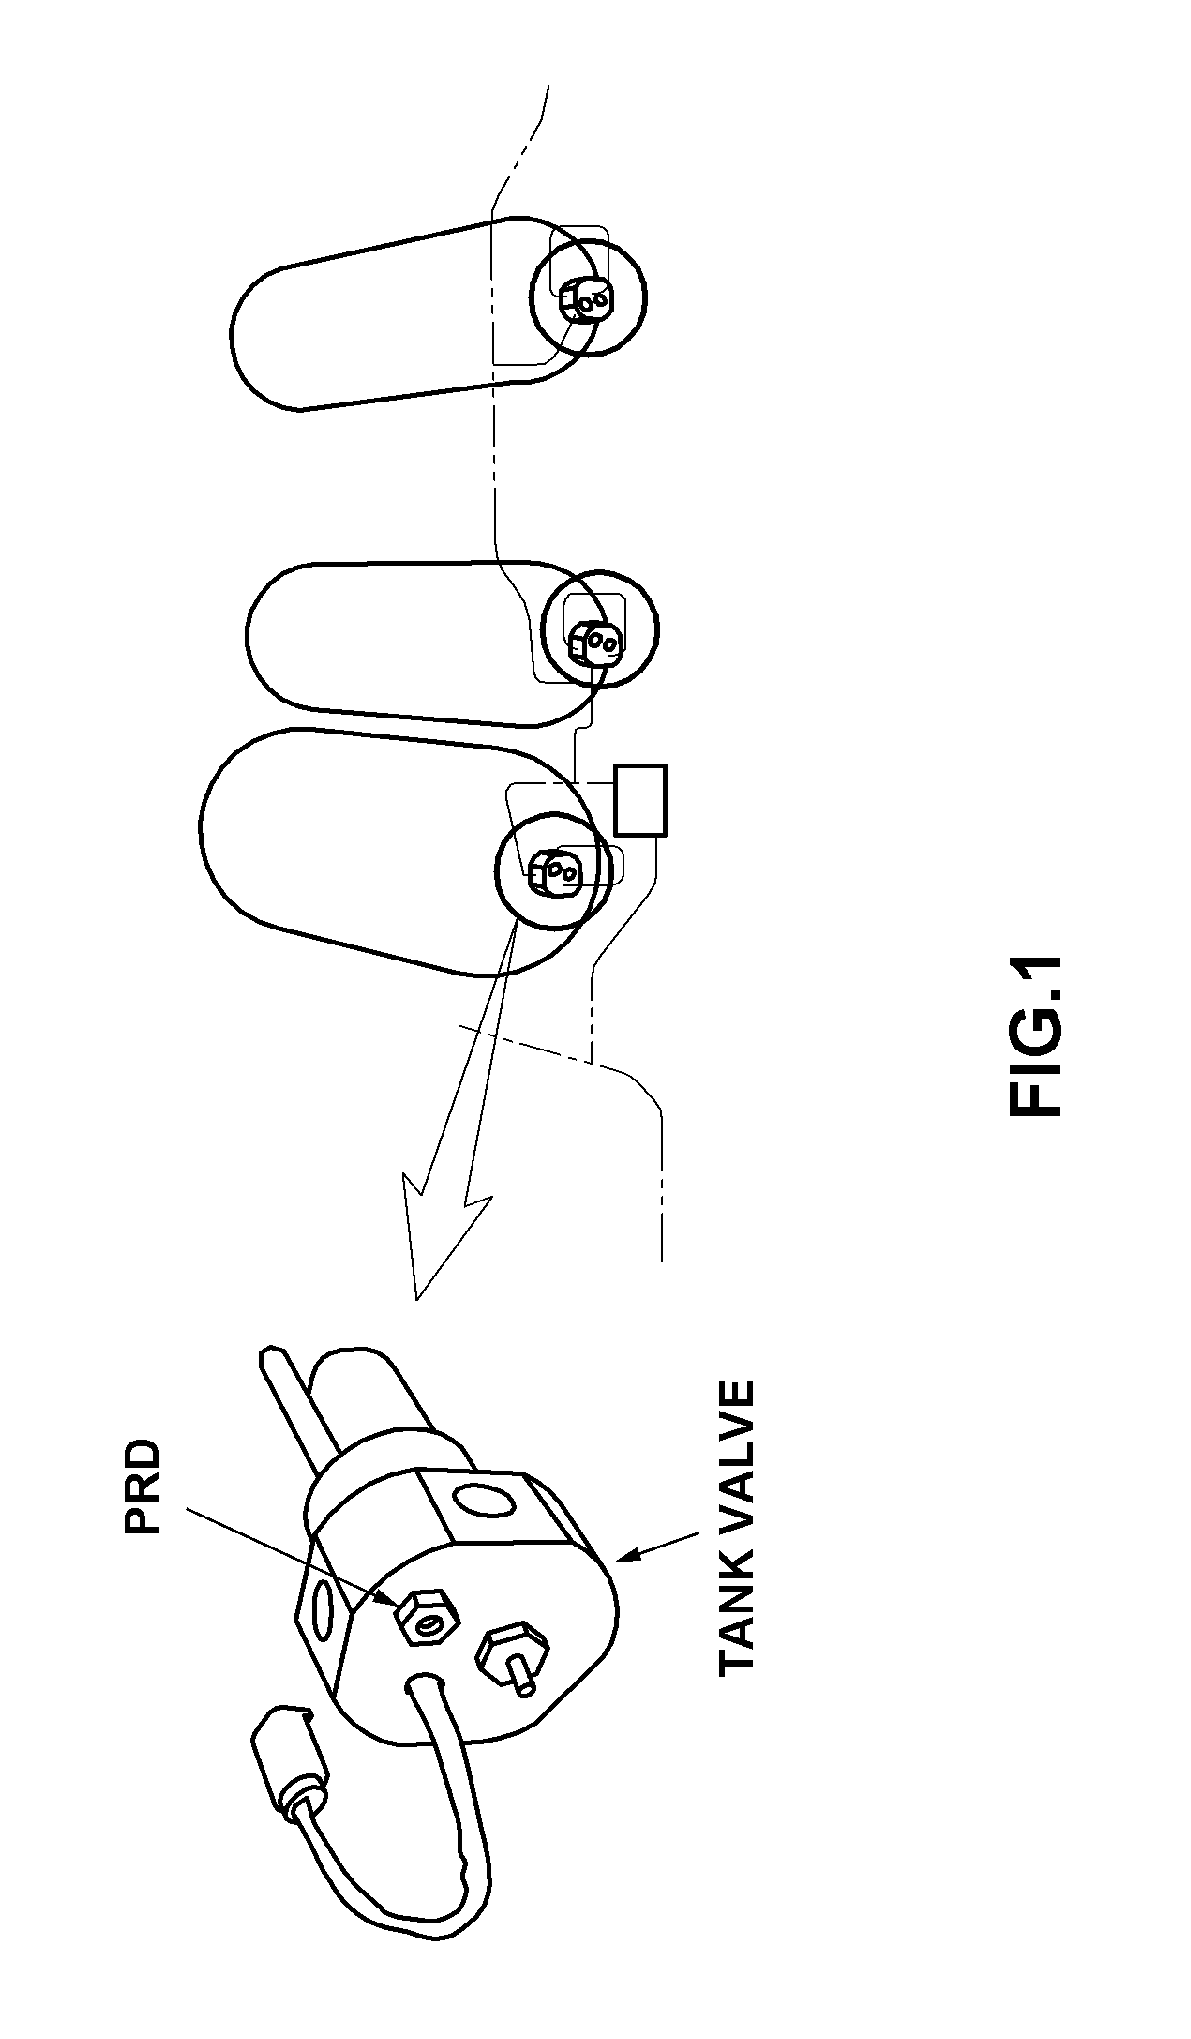 Fire safety apparatus for high-pressure gas storage system